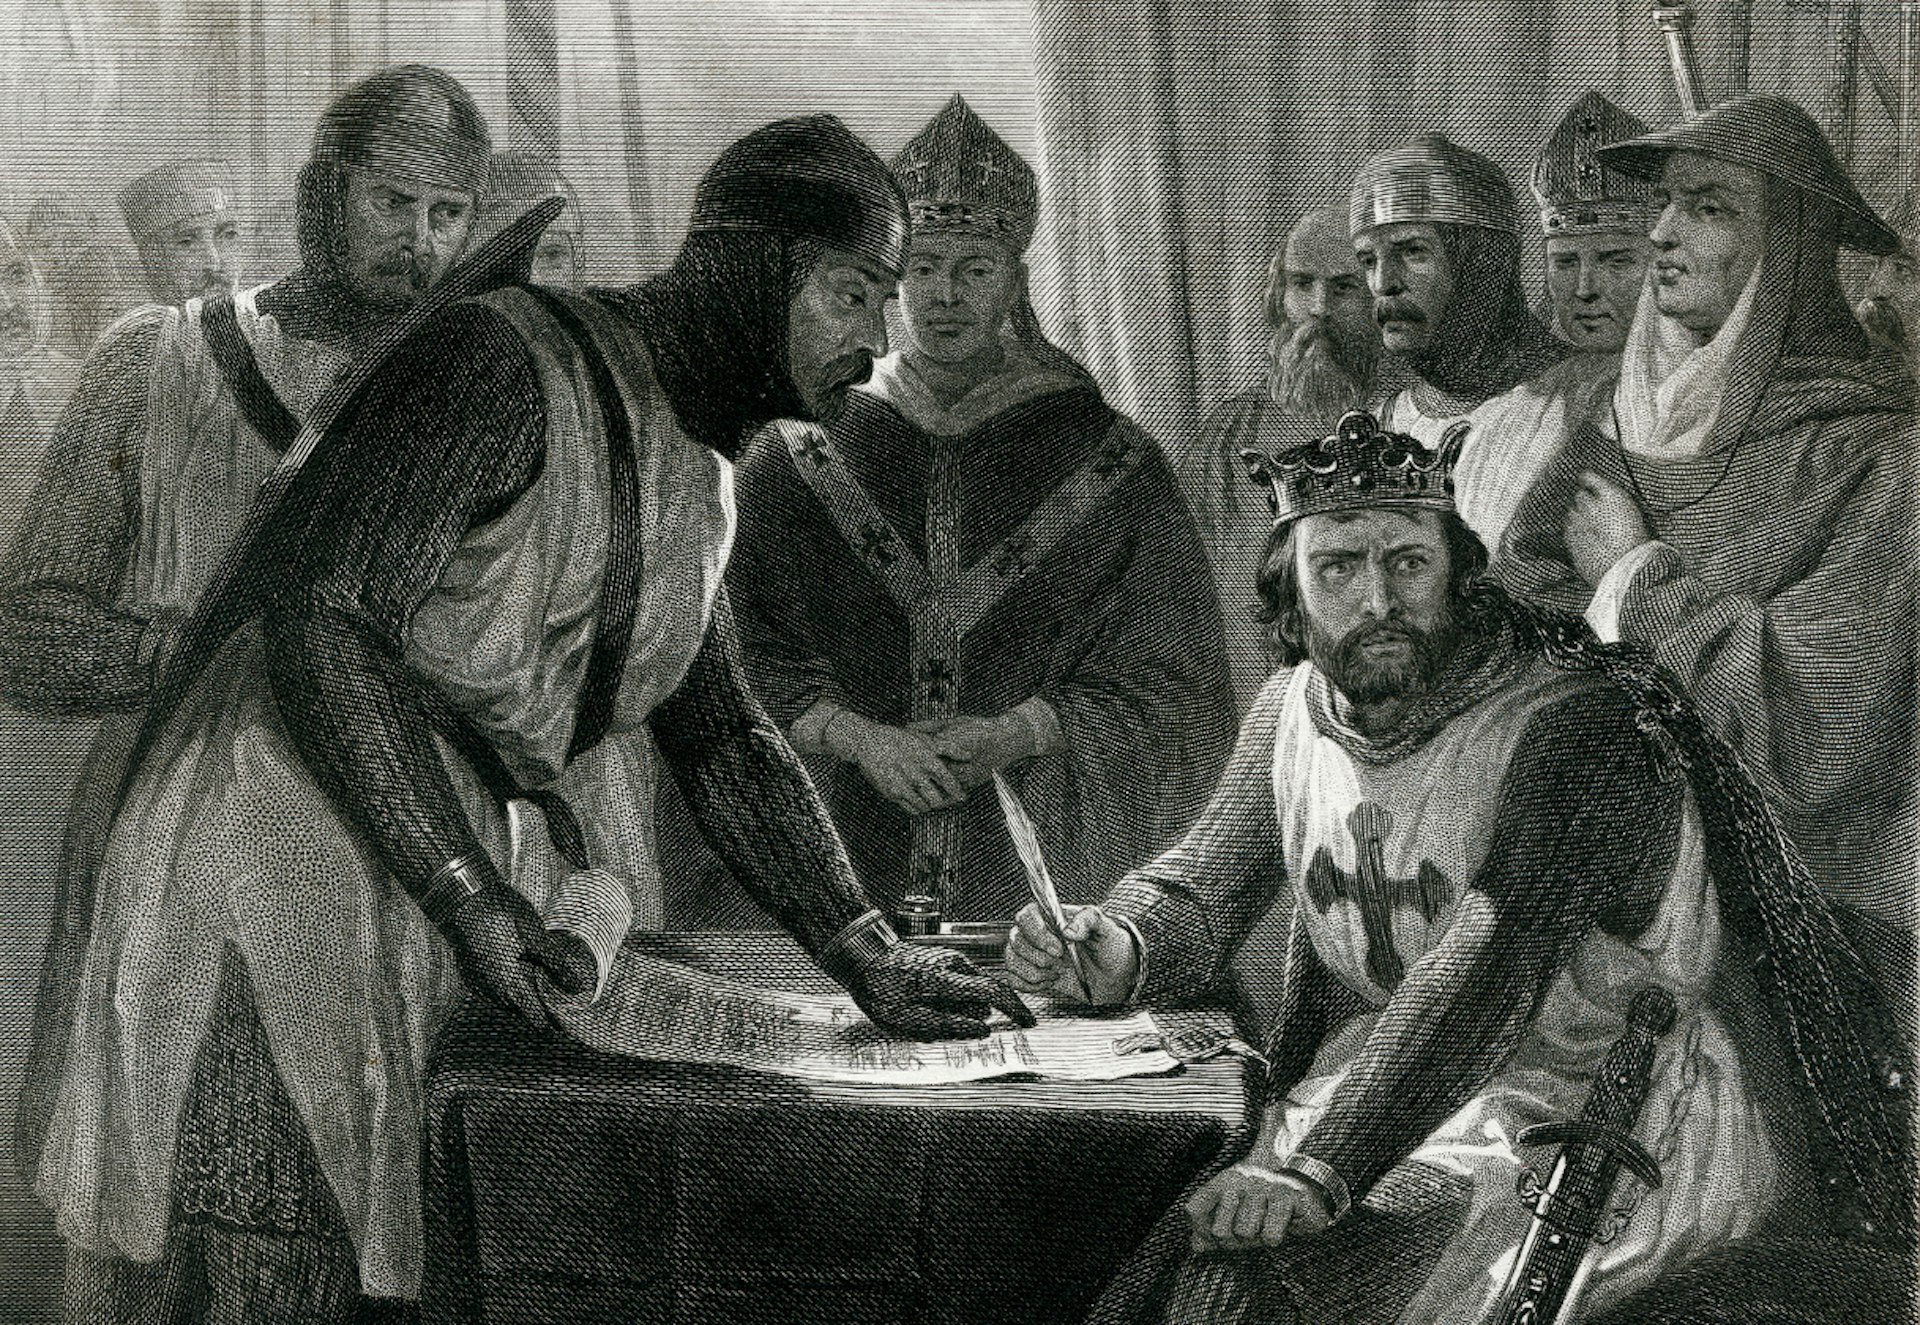 An 1873 engraving shows King John reluctantly signing the Magna Carta. Image by Traveller 1116 / Getty